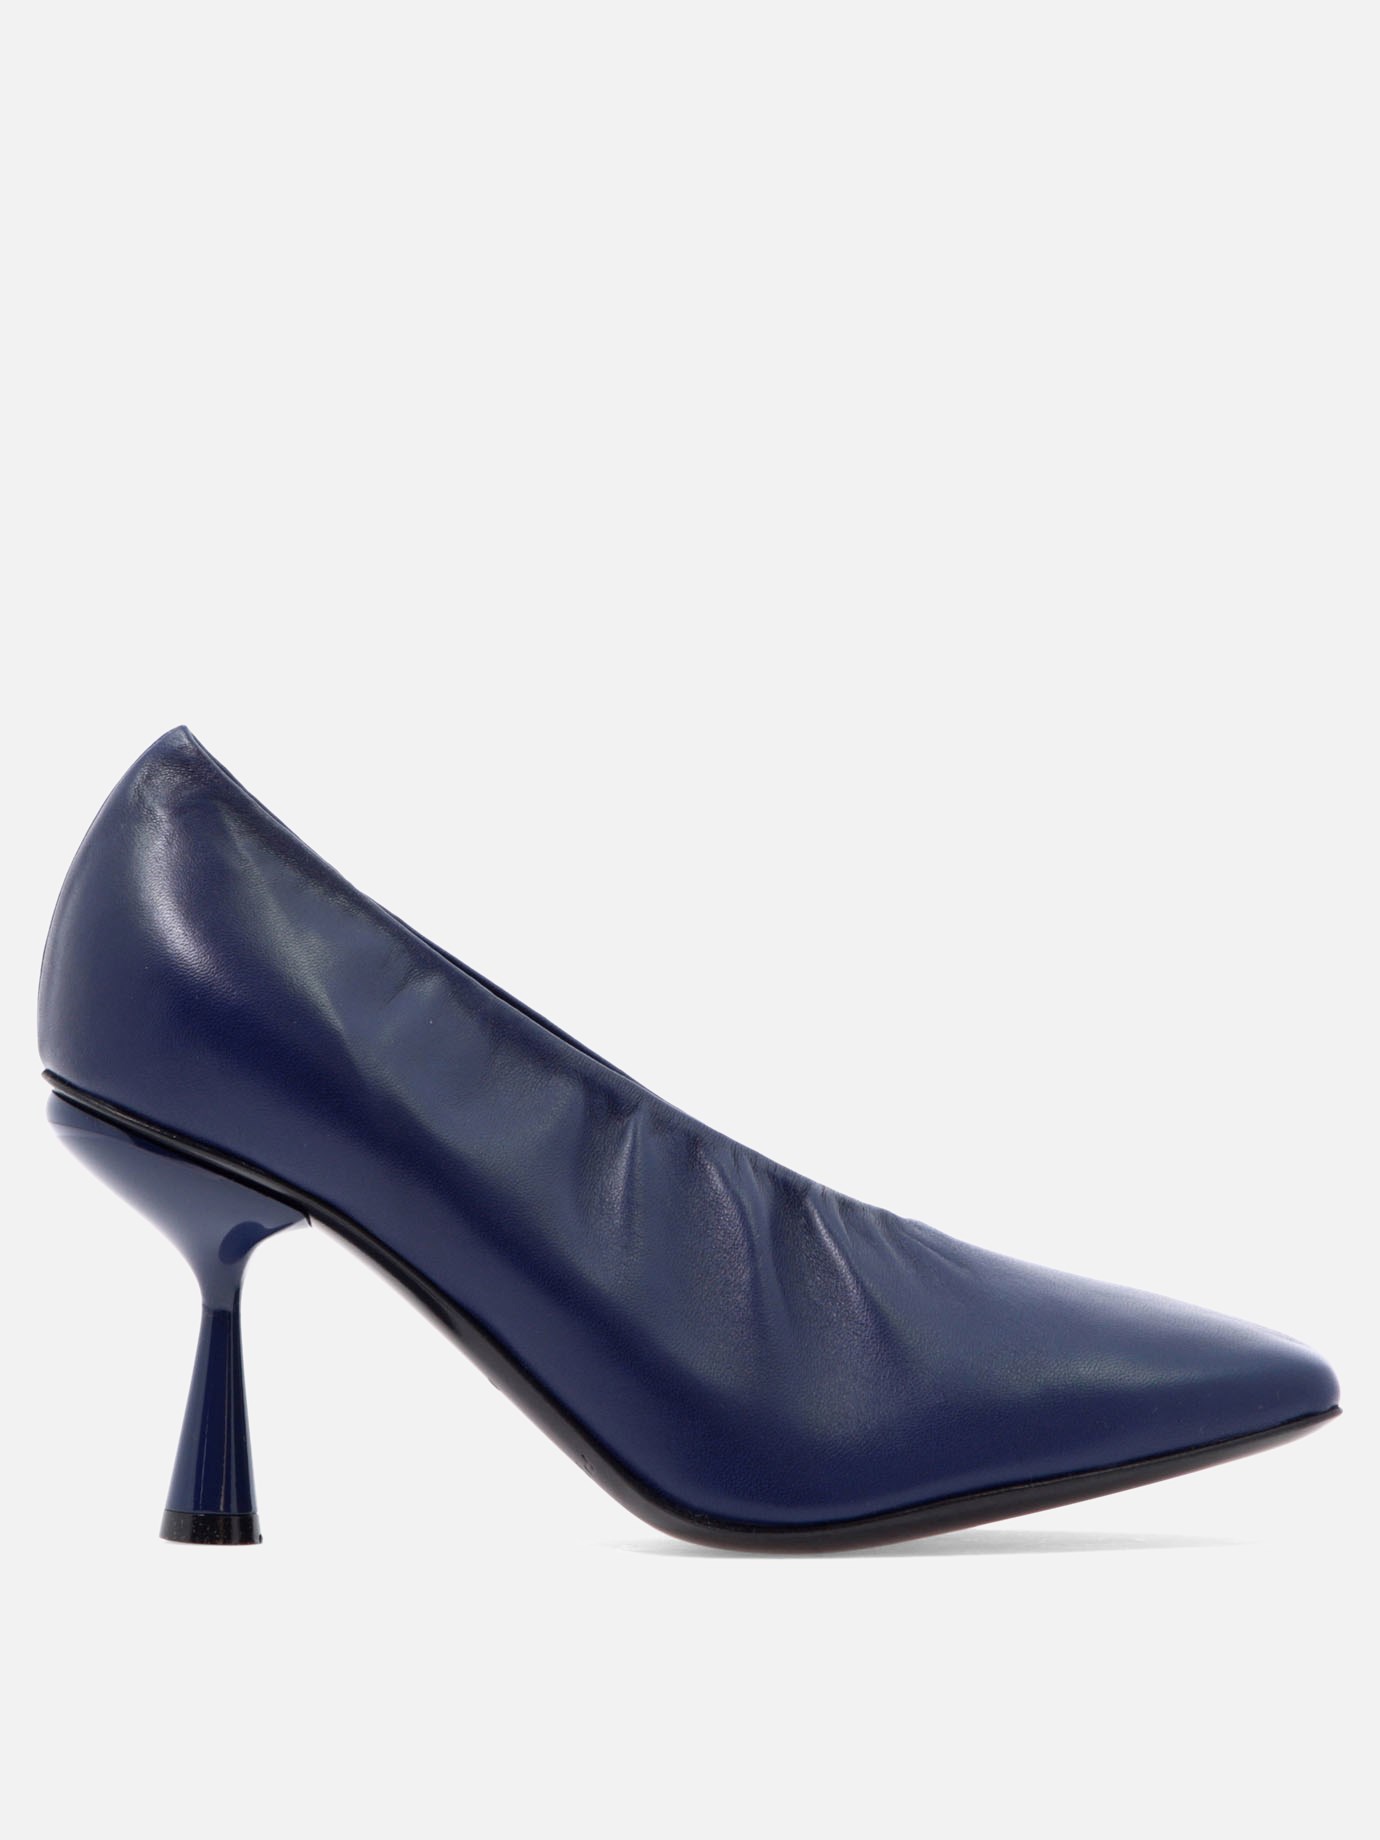 Pumps with square toe